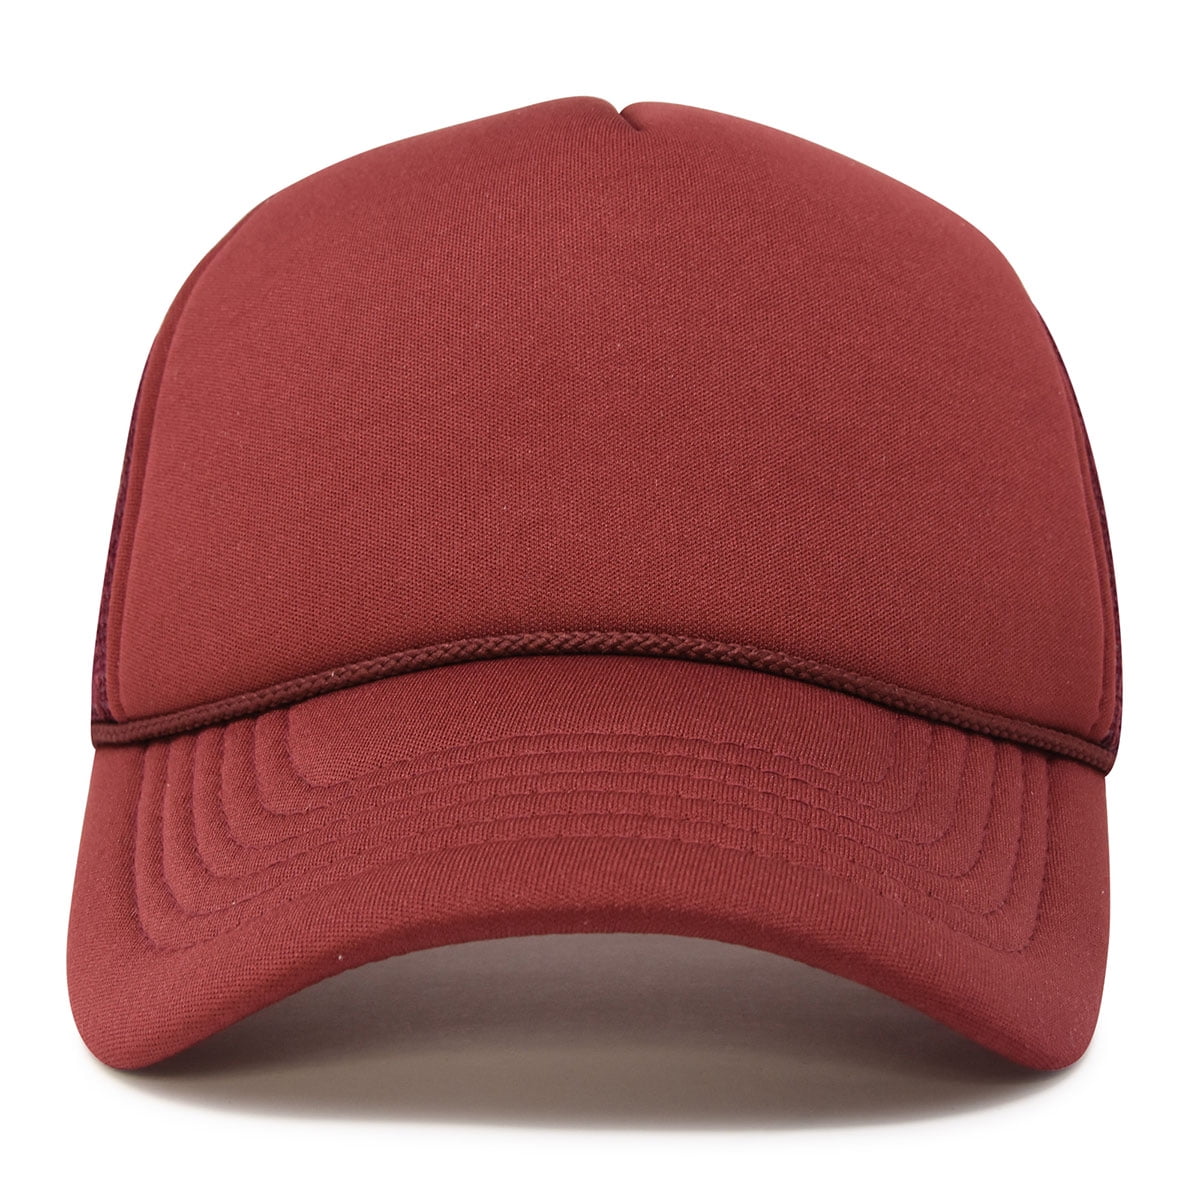 DALIX Trucker Cap Mesh Hat with Solid Colors and Adjustable Strap